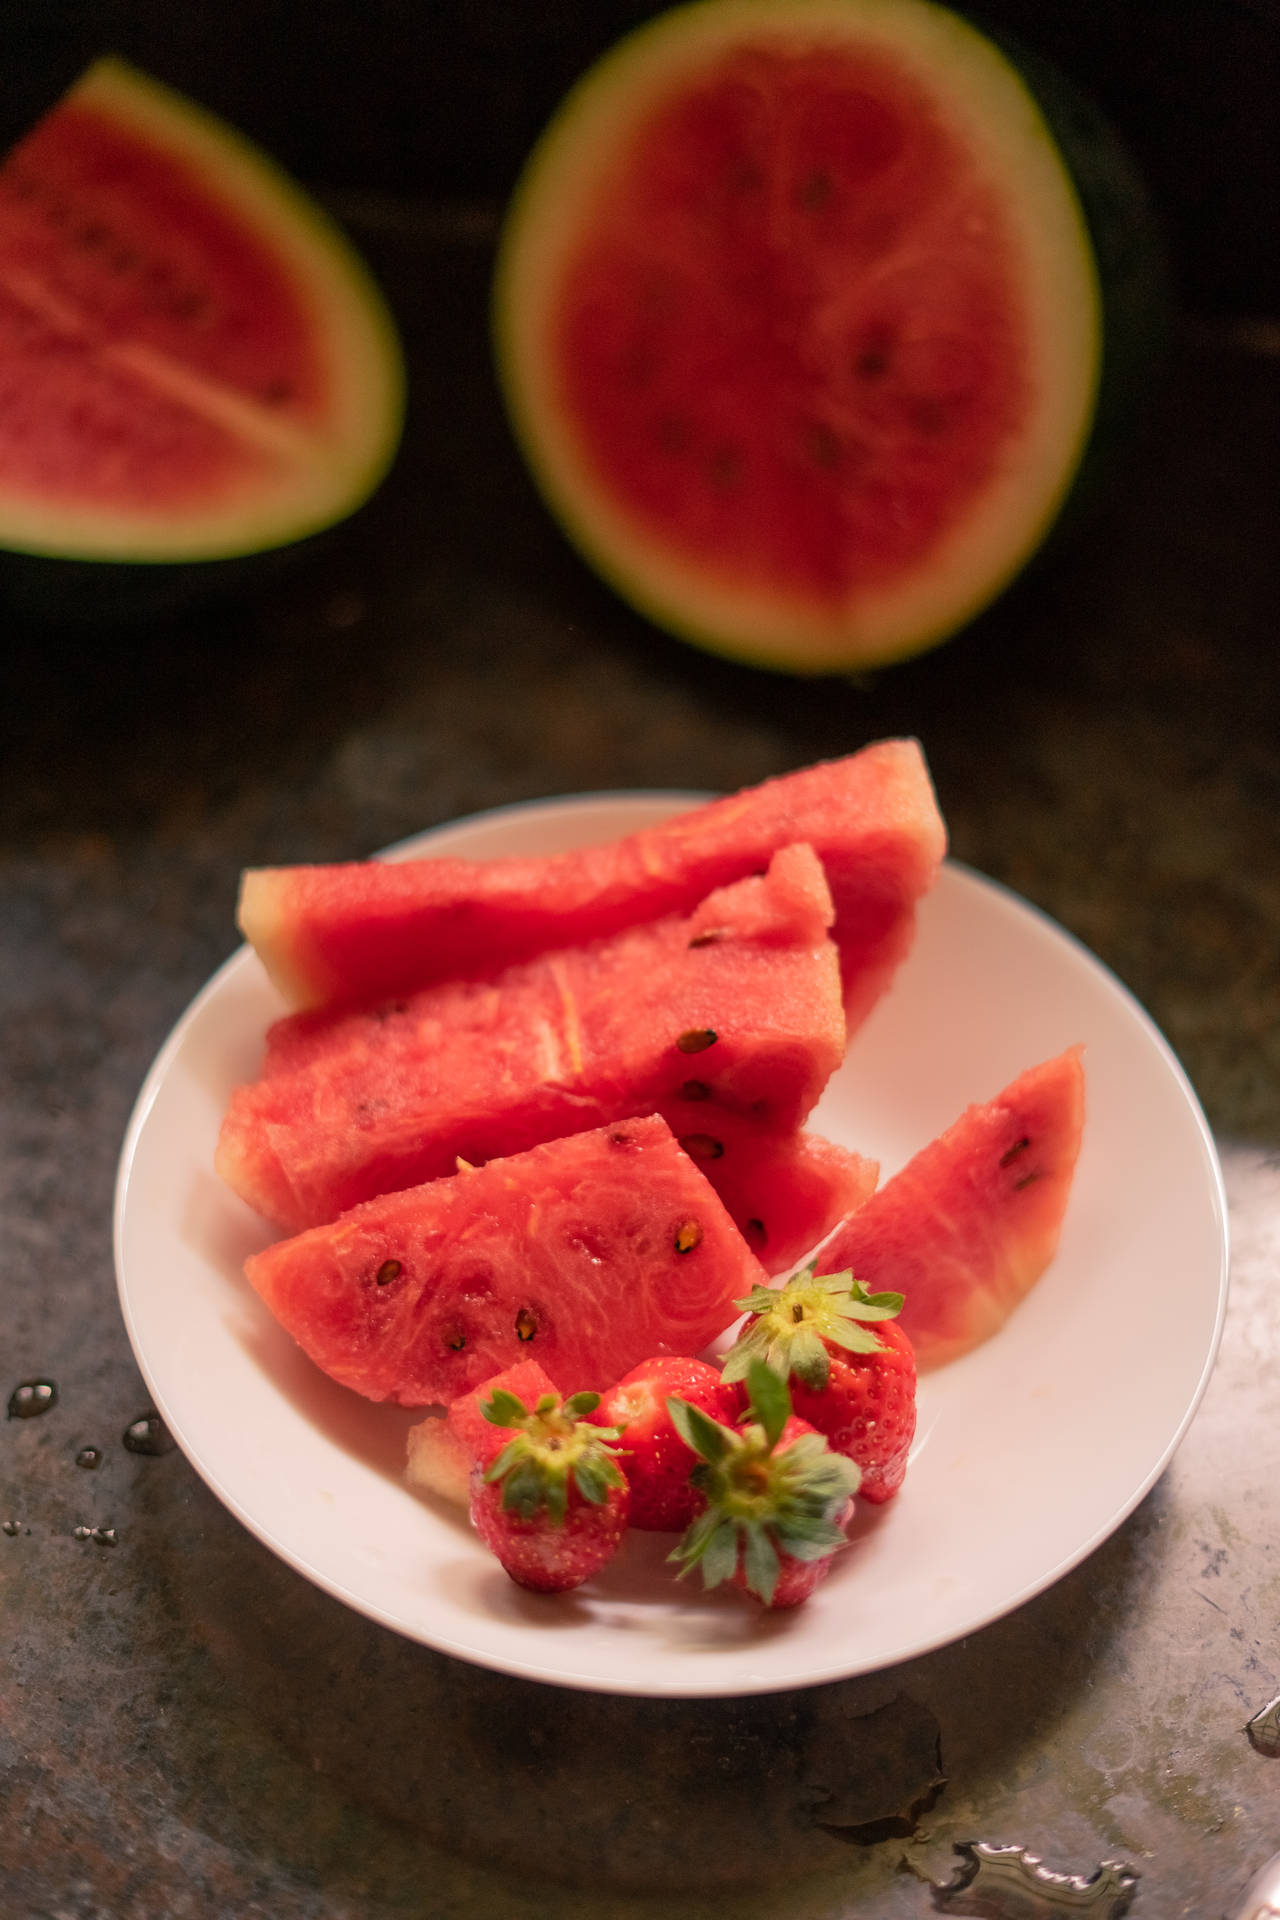 Watermelon And Strawberries Background